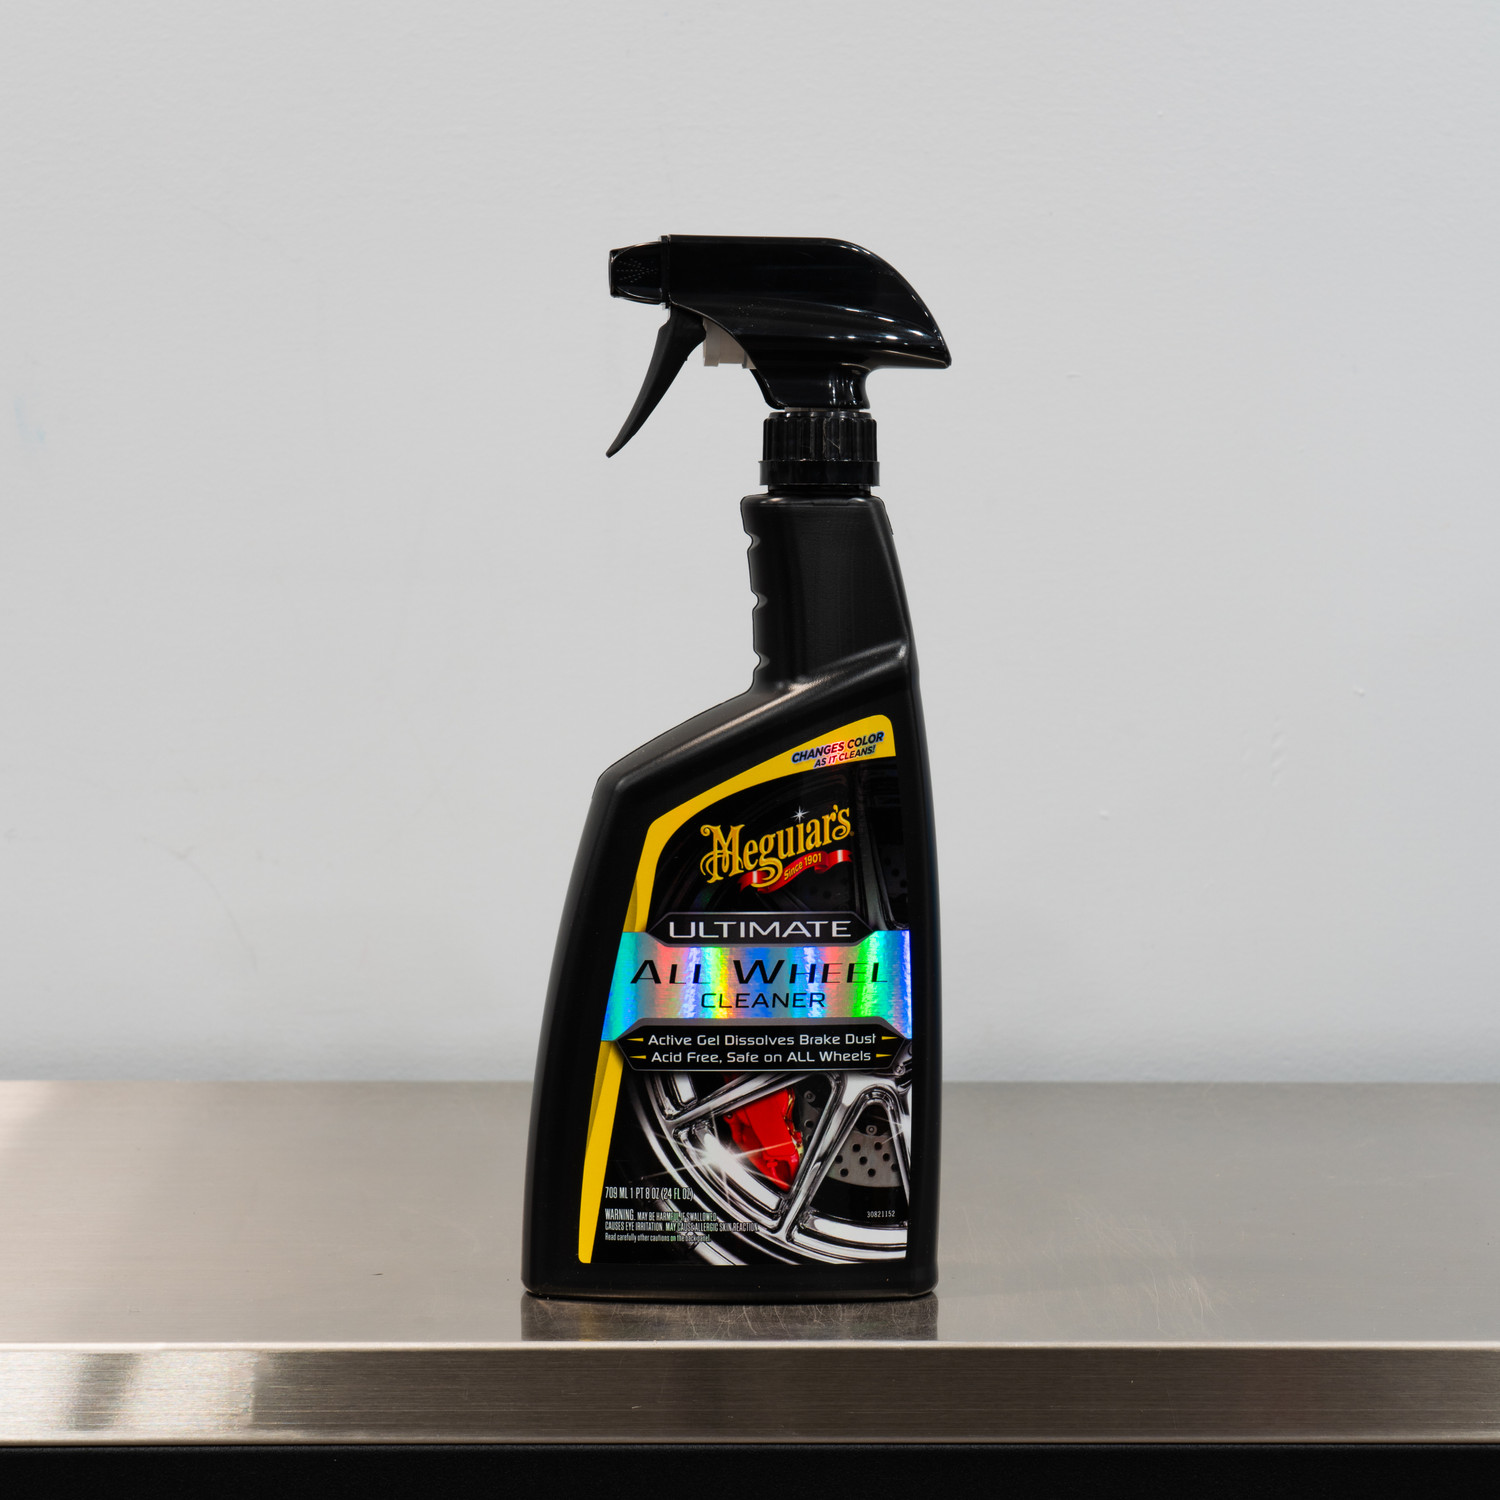 Wheel Cleaner+ - Color Changing Brake Dust Remover